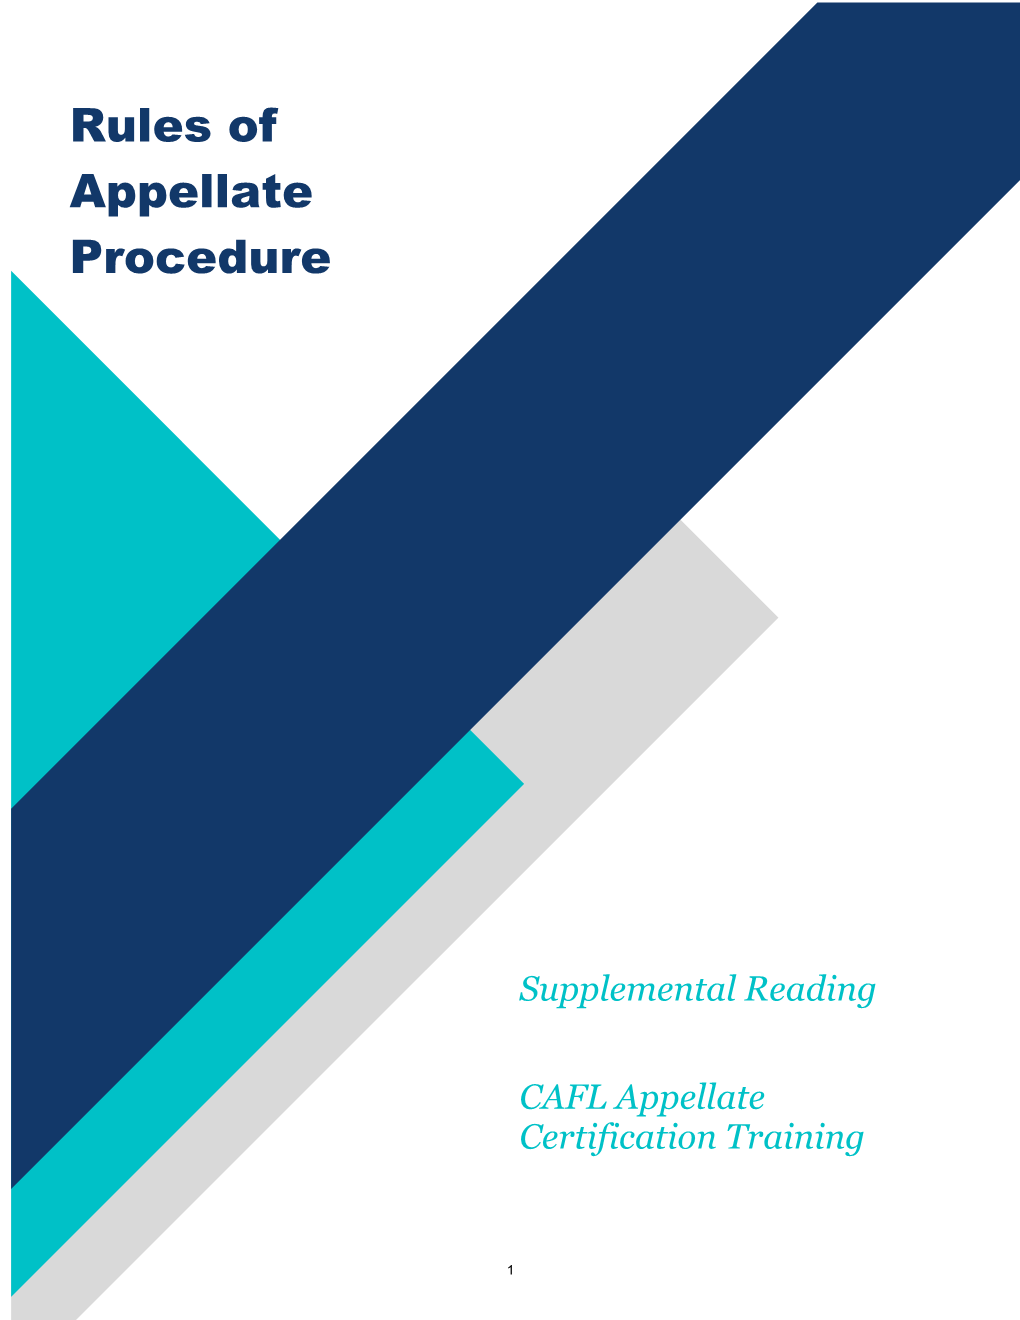 Supplemental Materials – Rules of Appellate Procedure